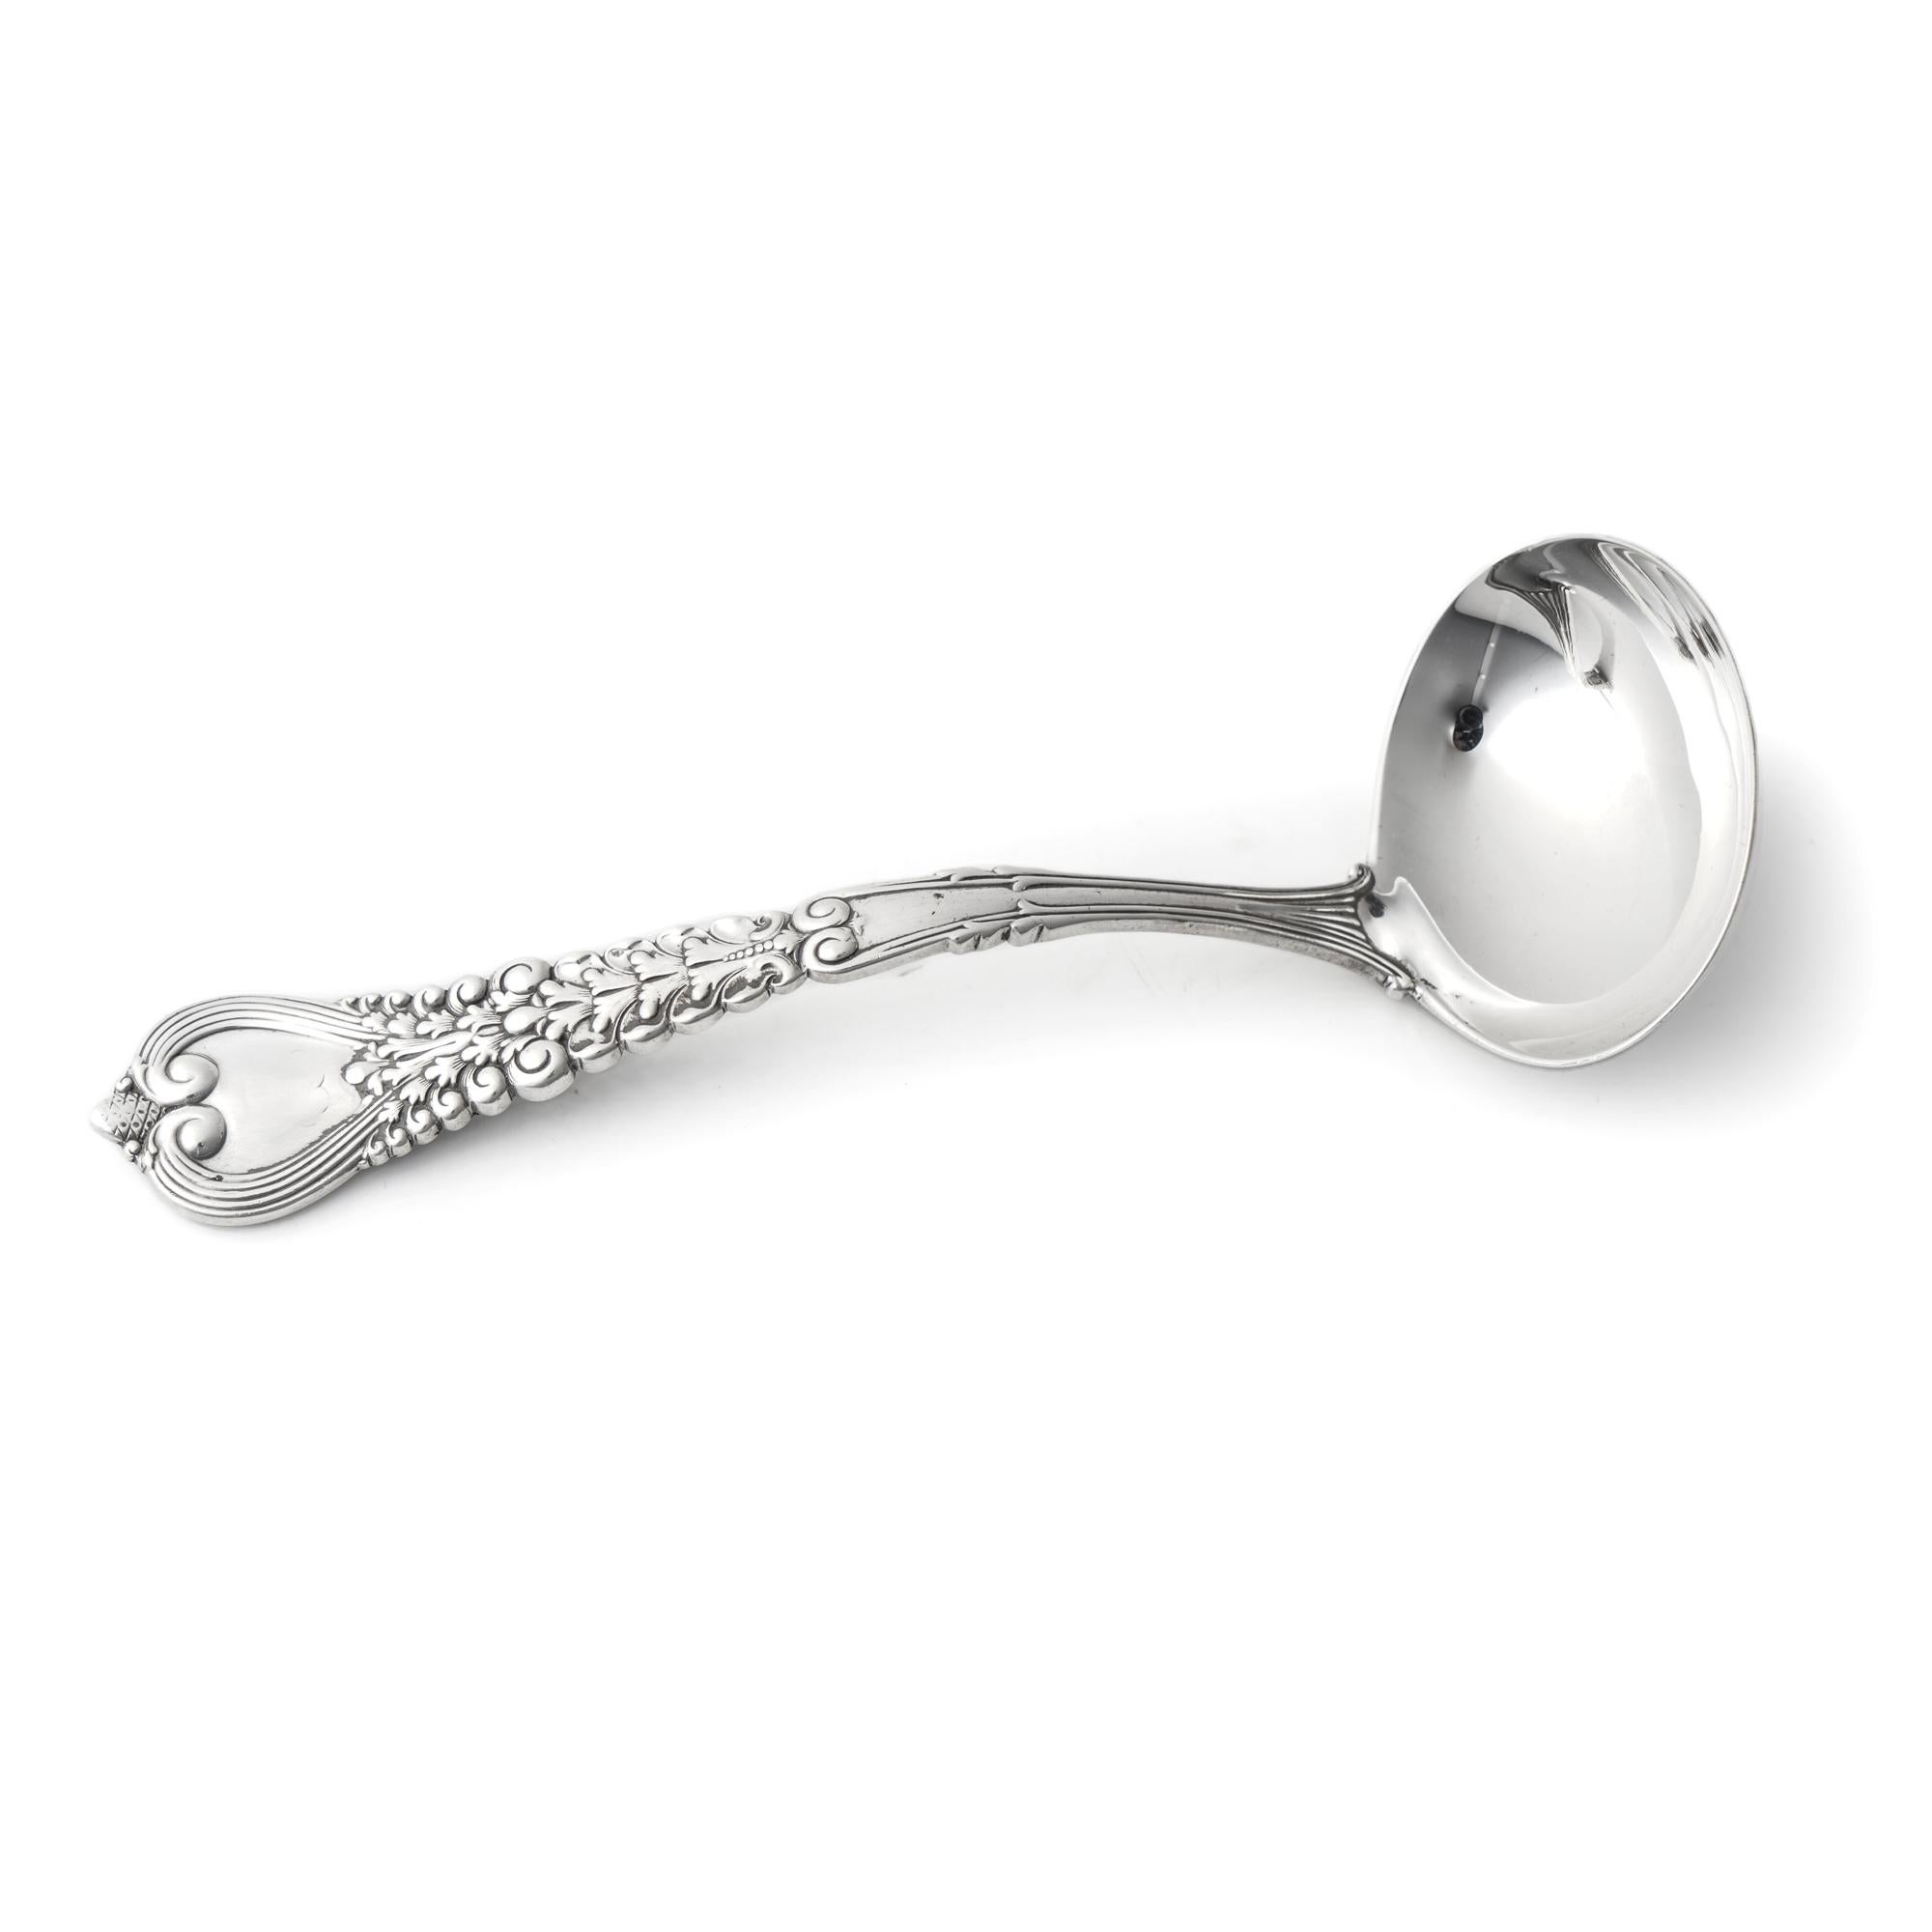 Early 20th Century Antique Tiffany & Co. Sterling Silver Florentine Pattern Sauce Ladle For Sale